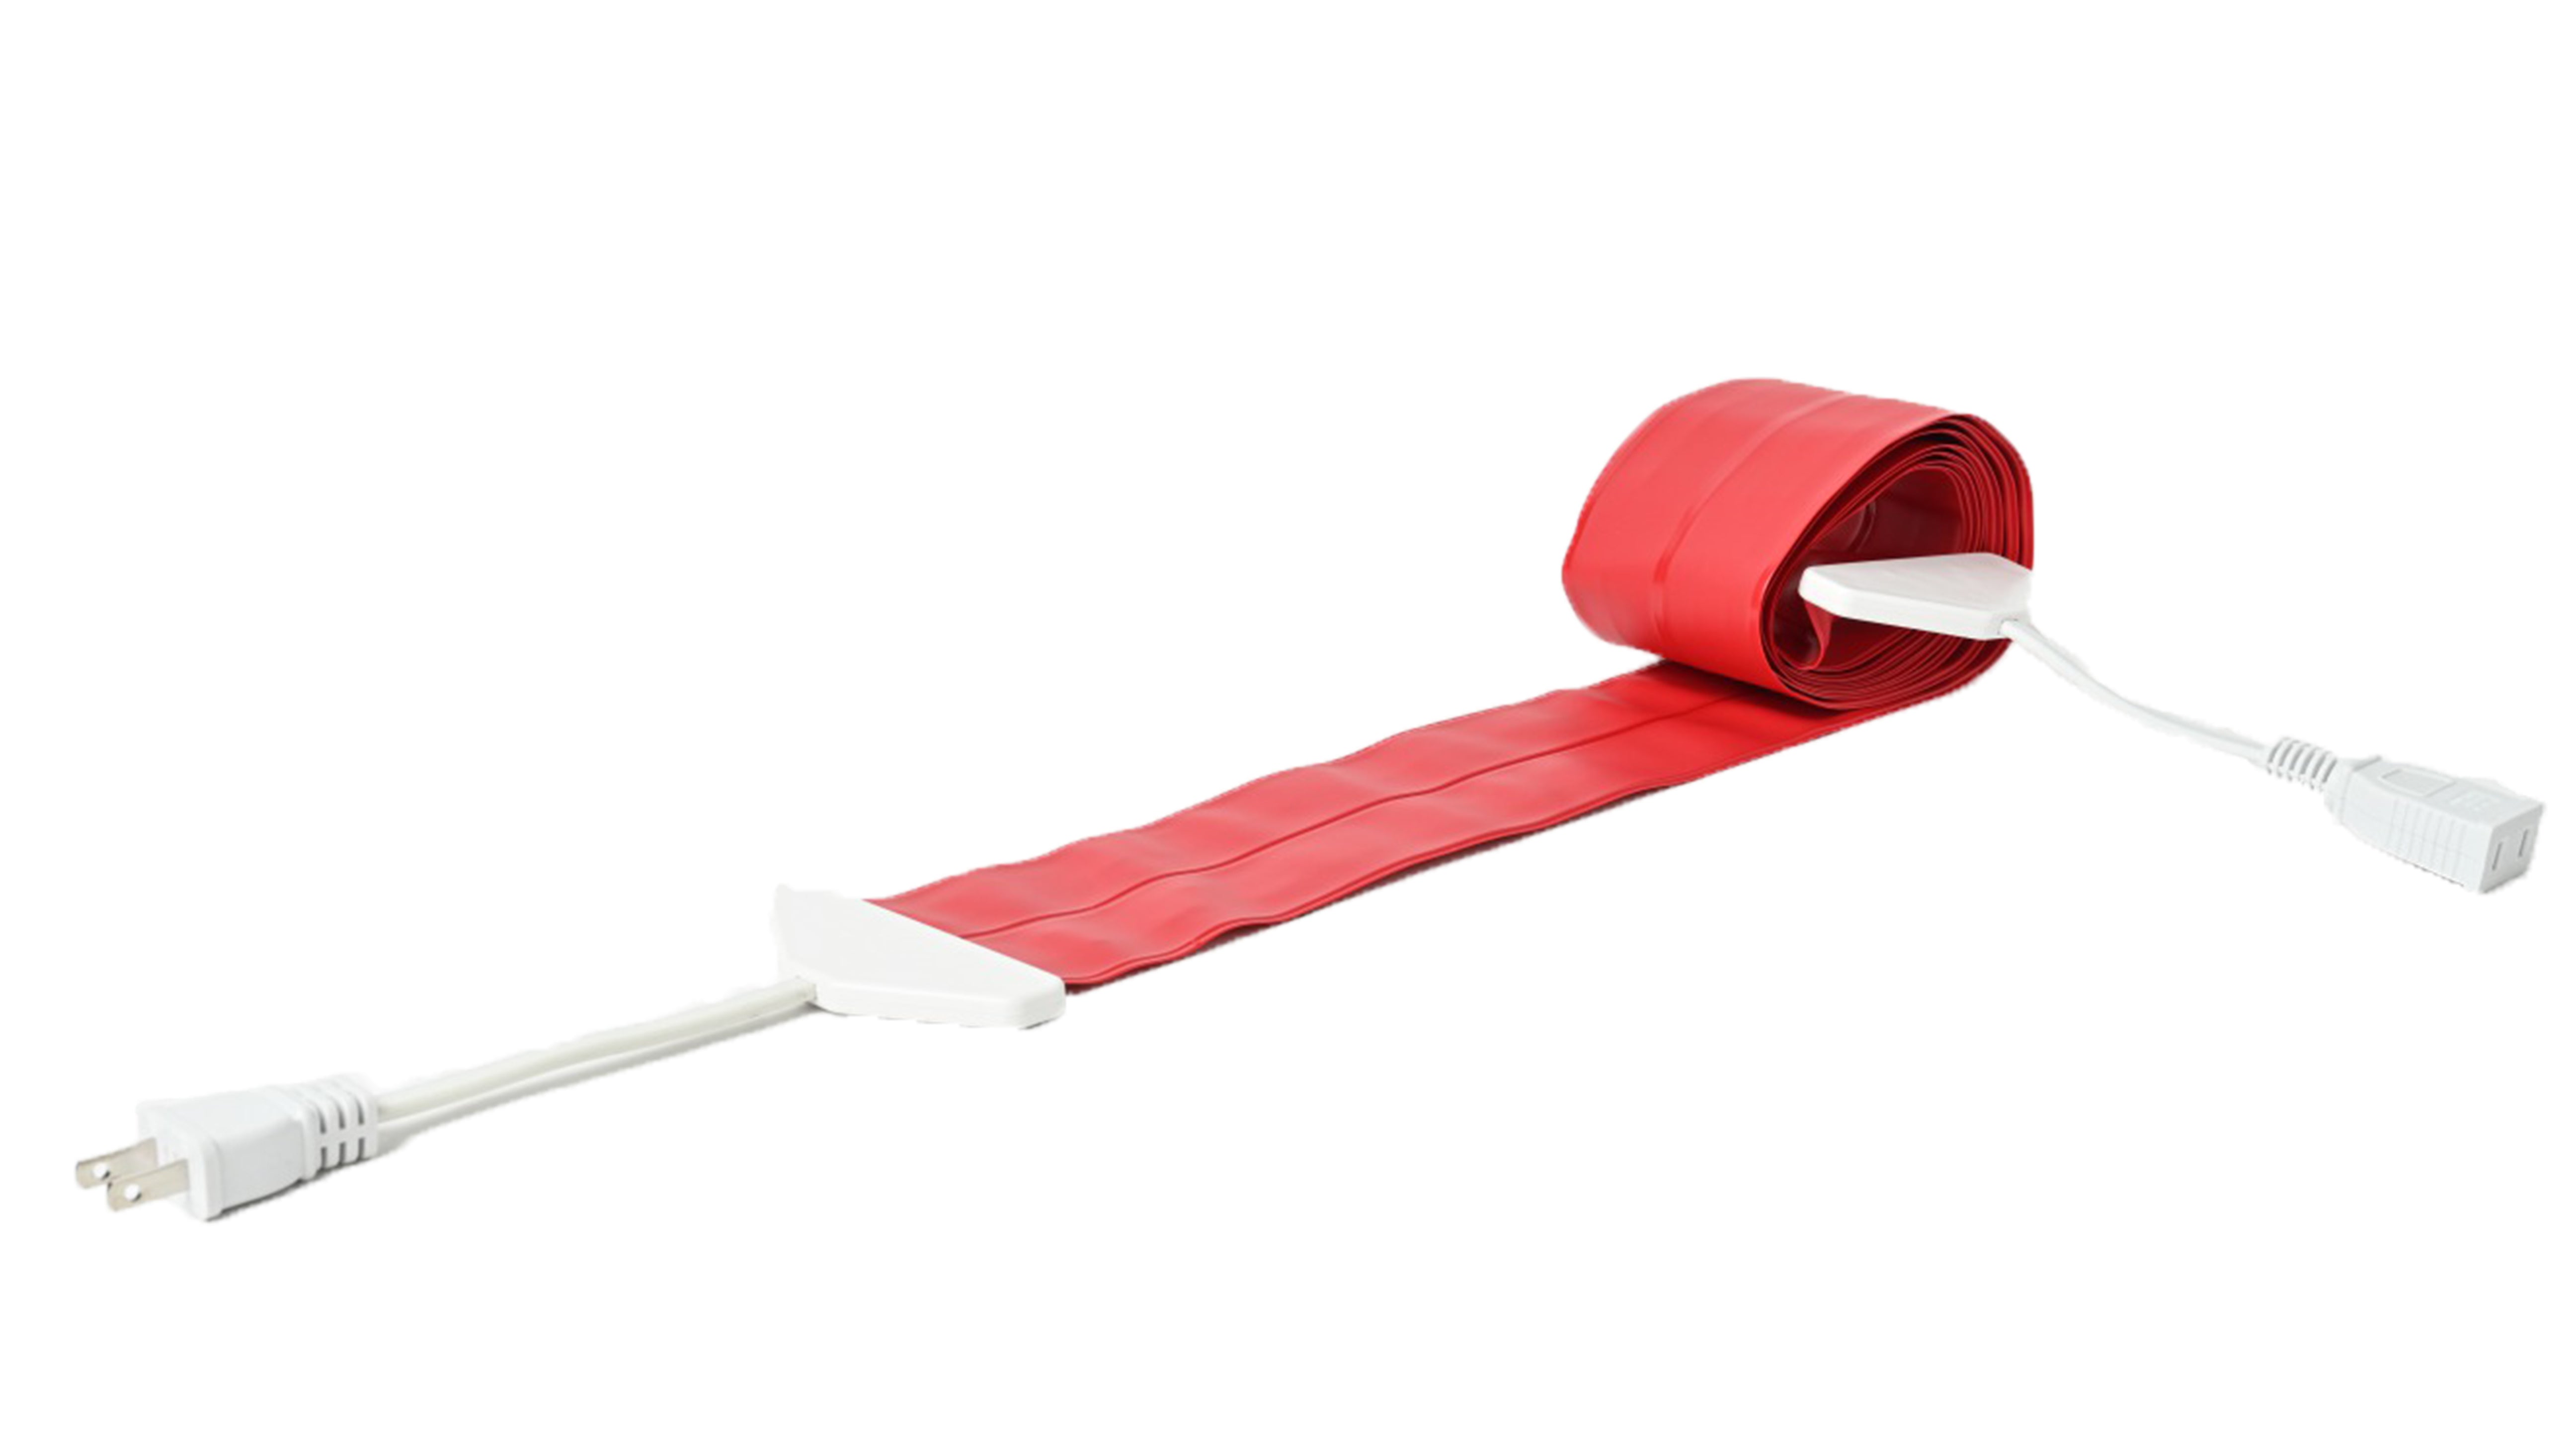 Koumeican the thinnest extension power cord in the world【Candy Apple Red】